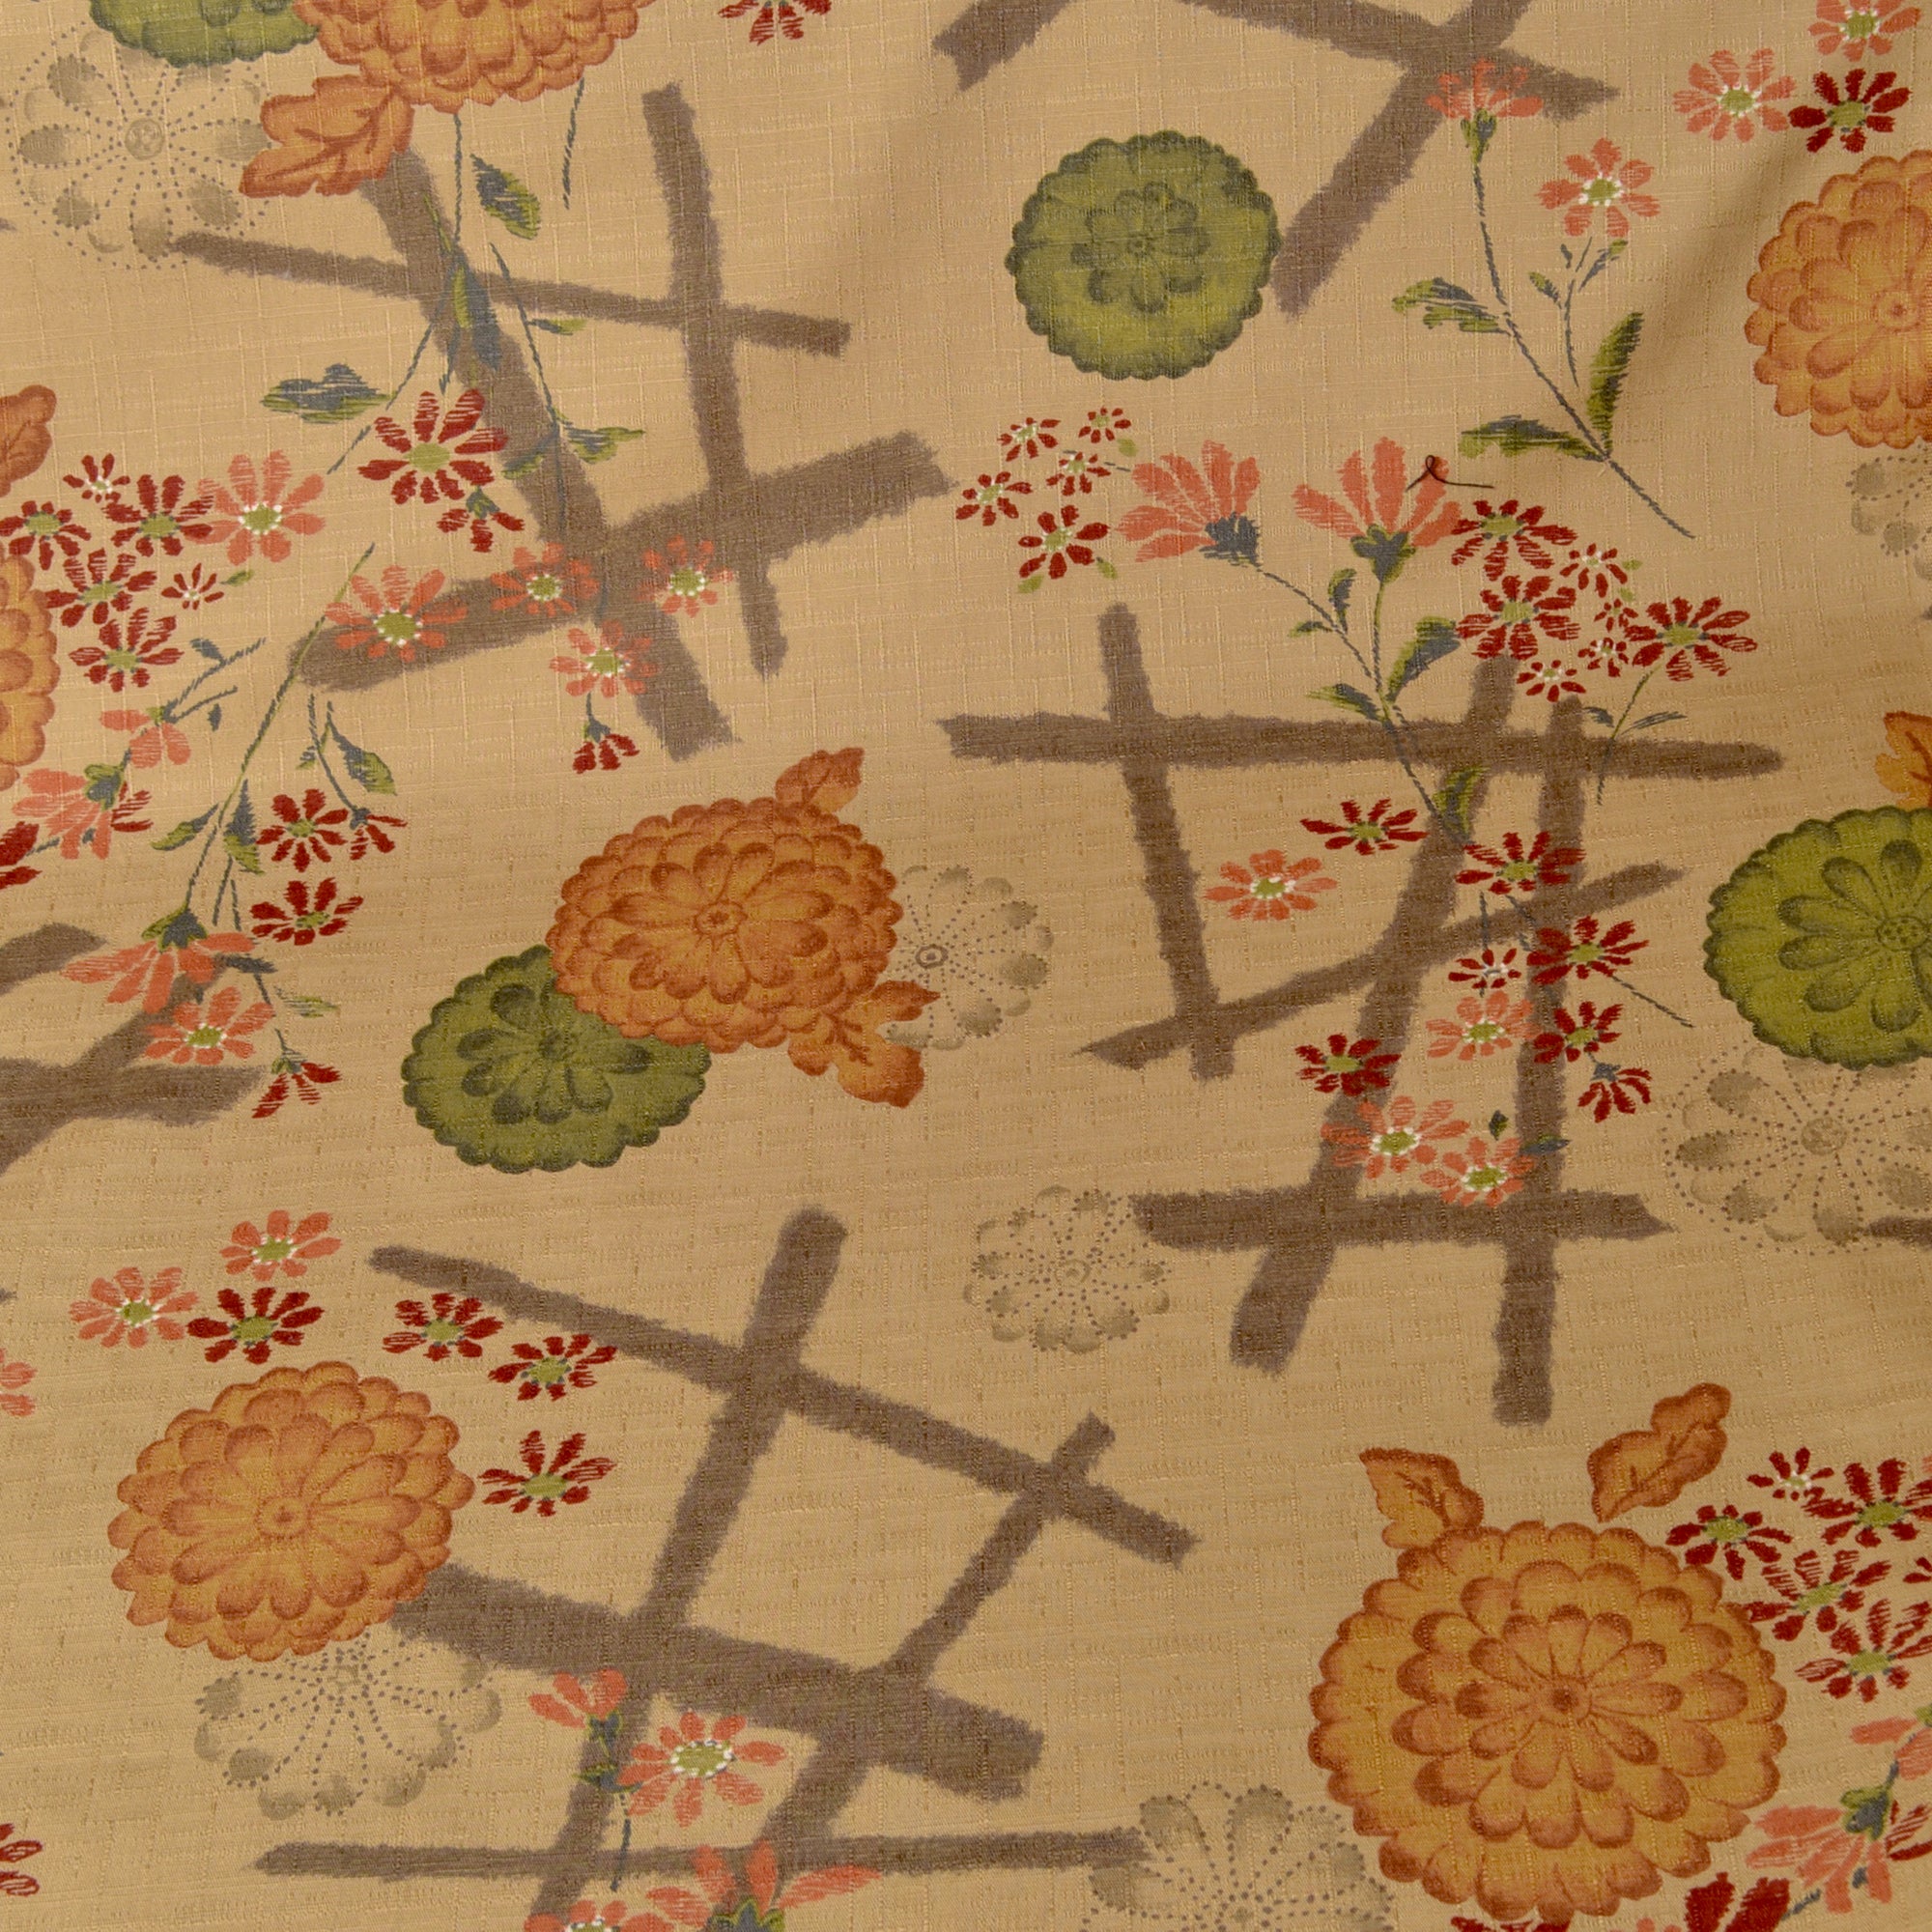 Japanese sewing fabric